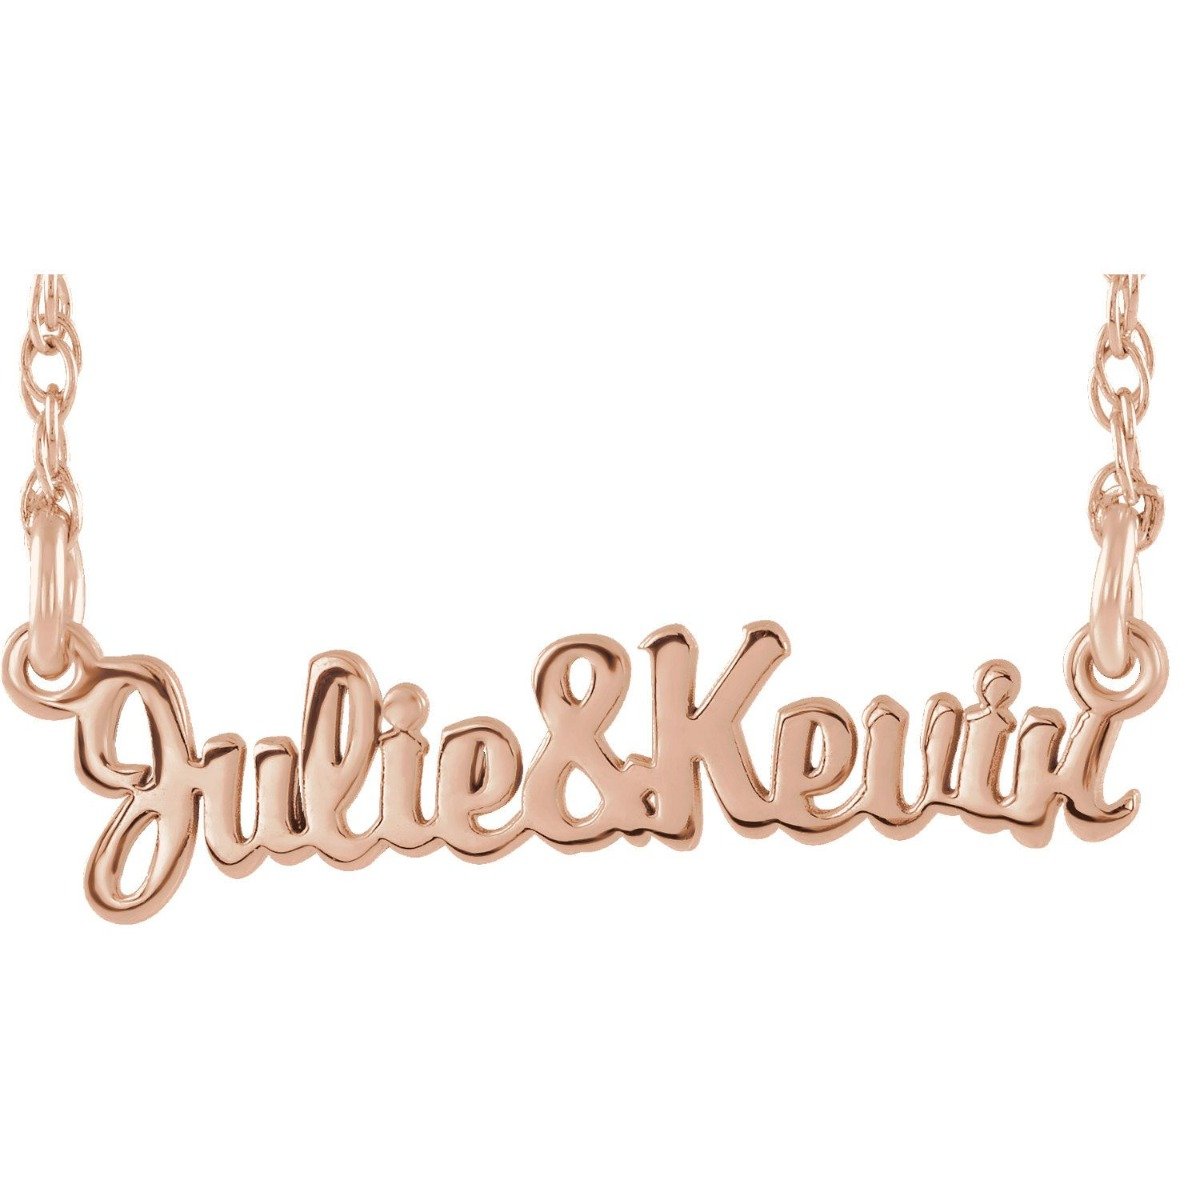 14KT GOLD SCRIPT COUPLES NAMEPLATE NECKLACE 16 Inches / 14KT Gold / Rose,16 Inches / Sterling Silver / Rose,18 Inches / 14KT Gold / Rose,18 Inches / Sterling Silver / Rose